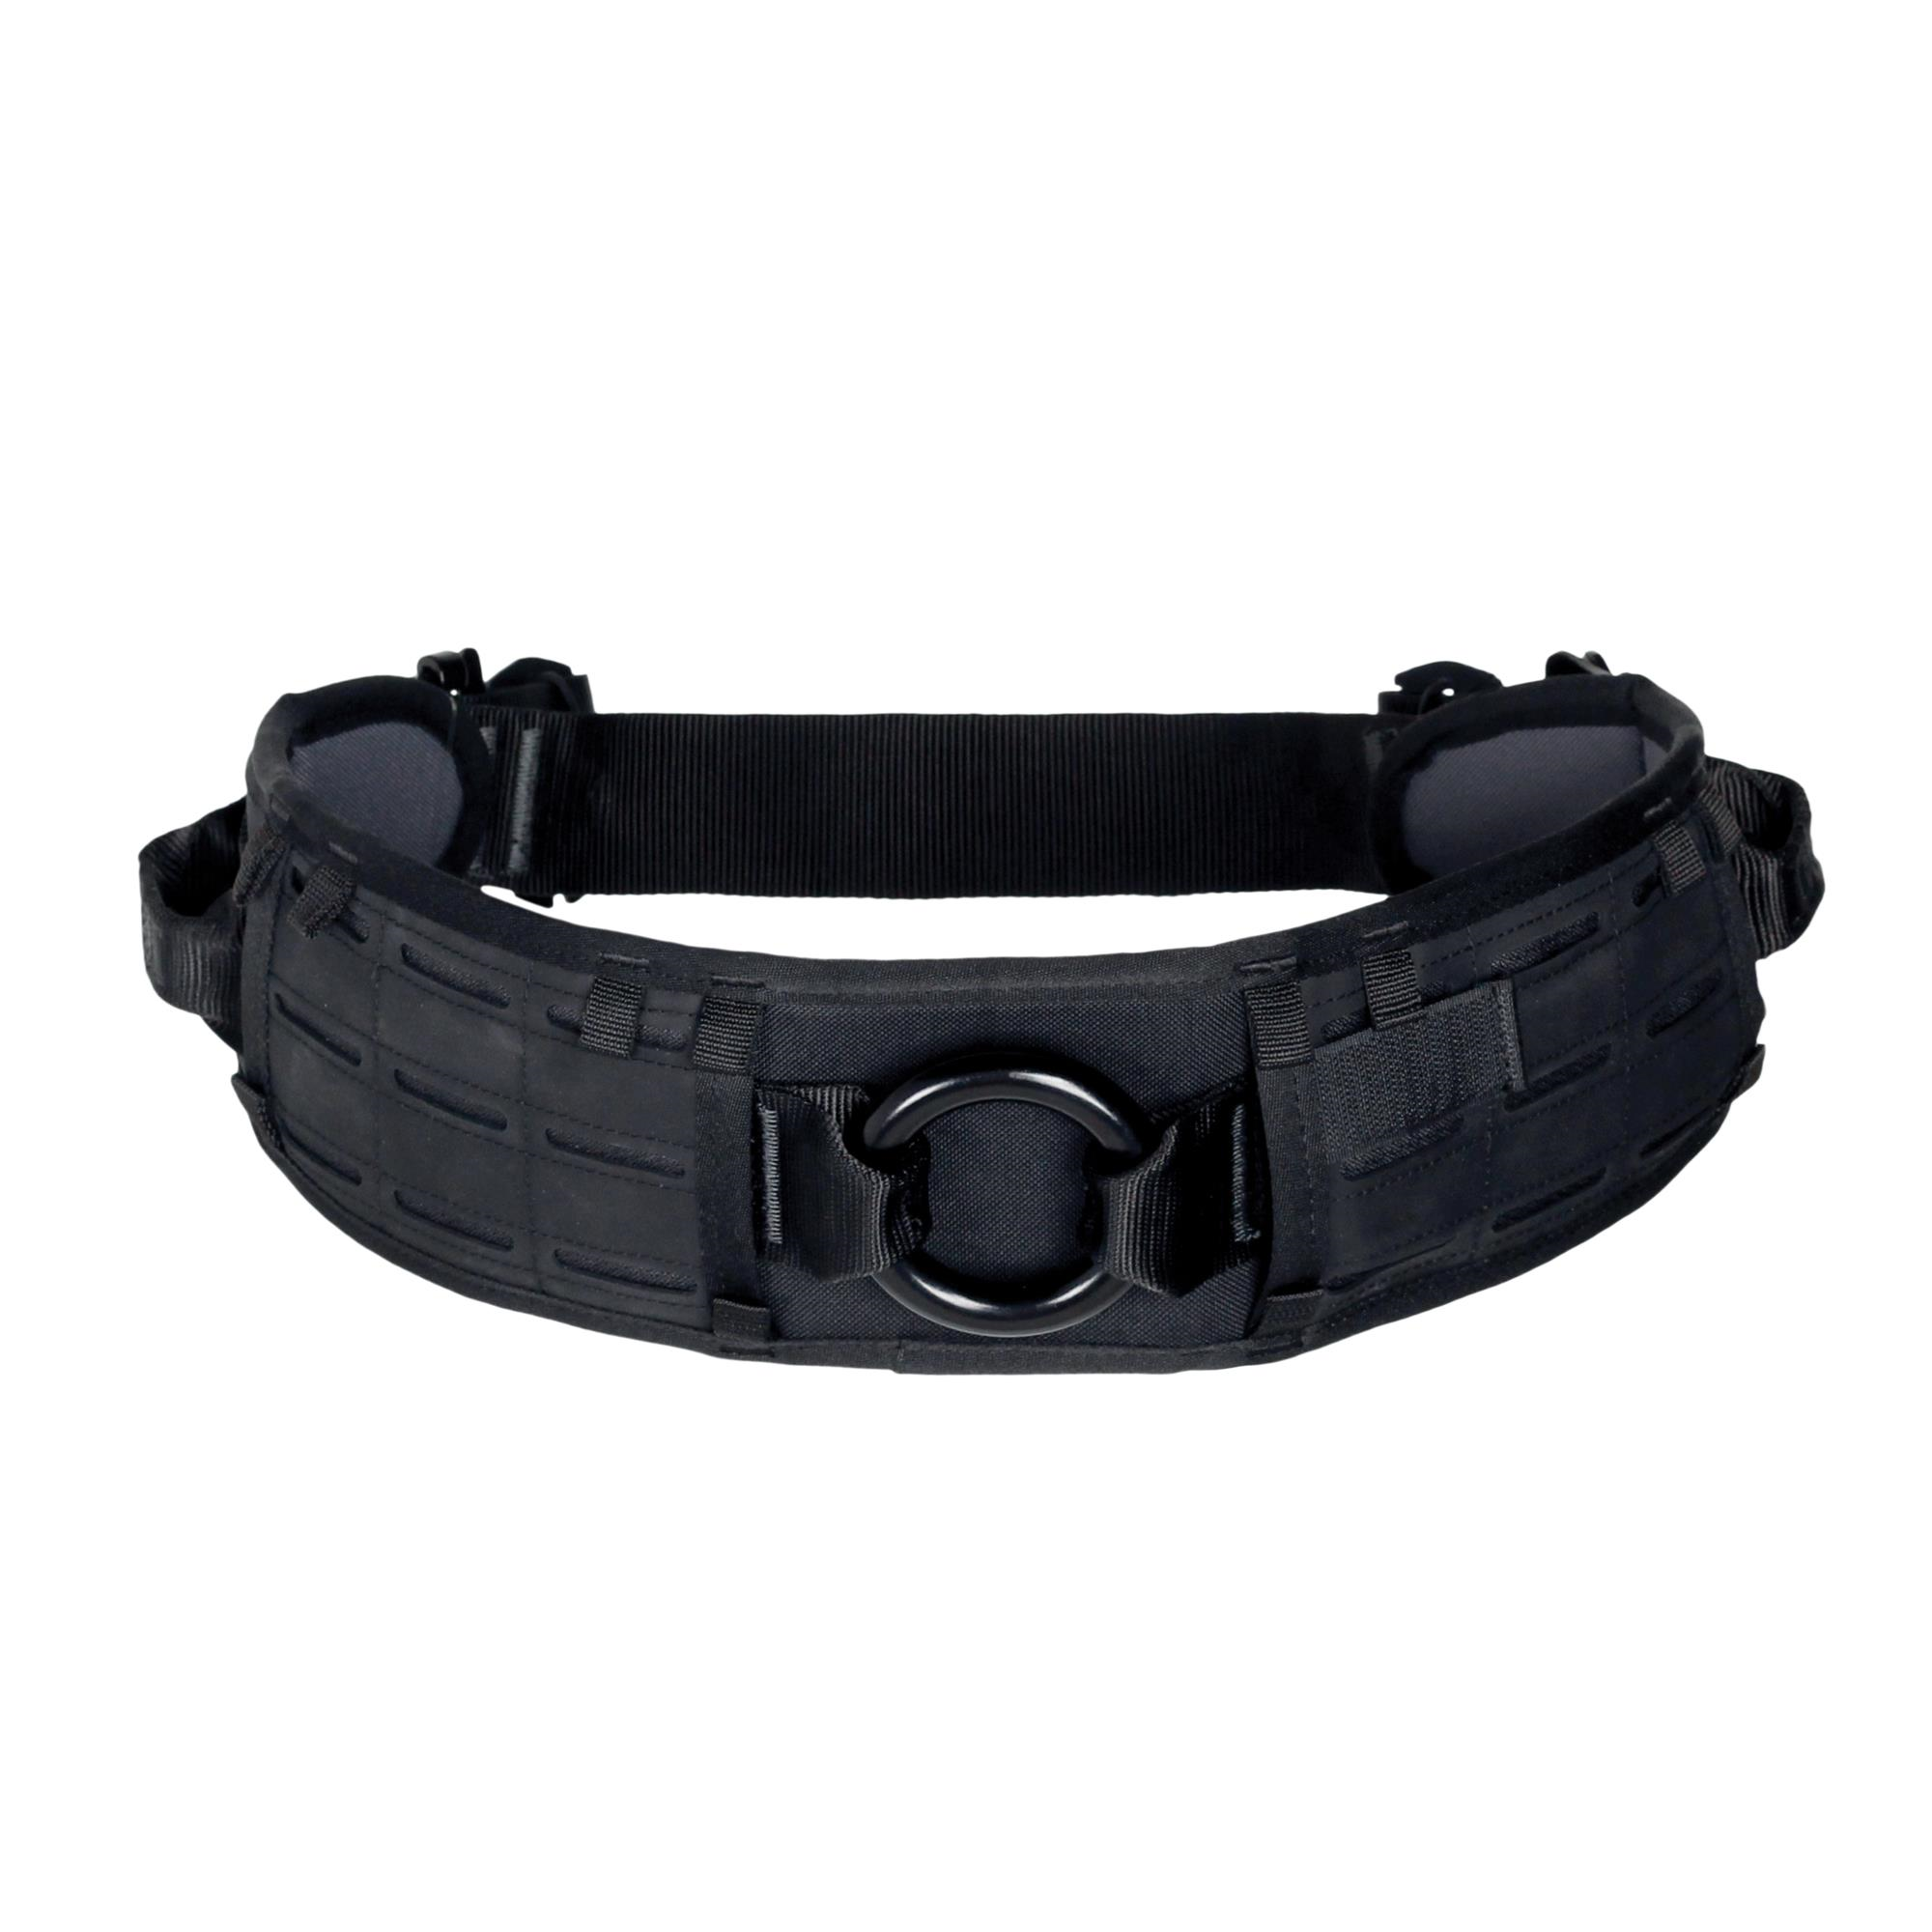 Heavy Leather Strap on Harness With Detatchable O-ring Belts. 